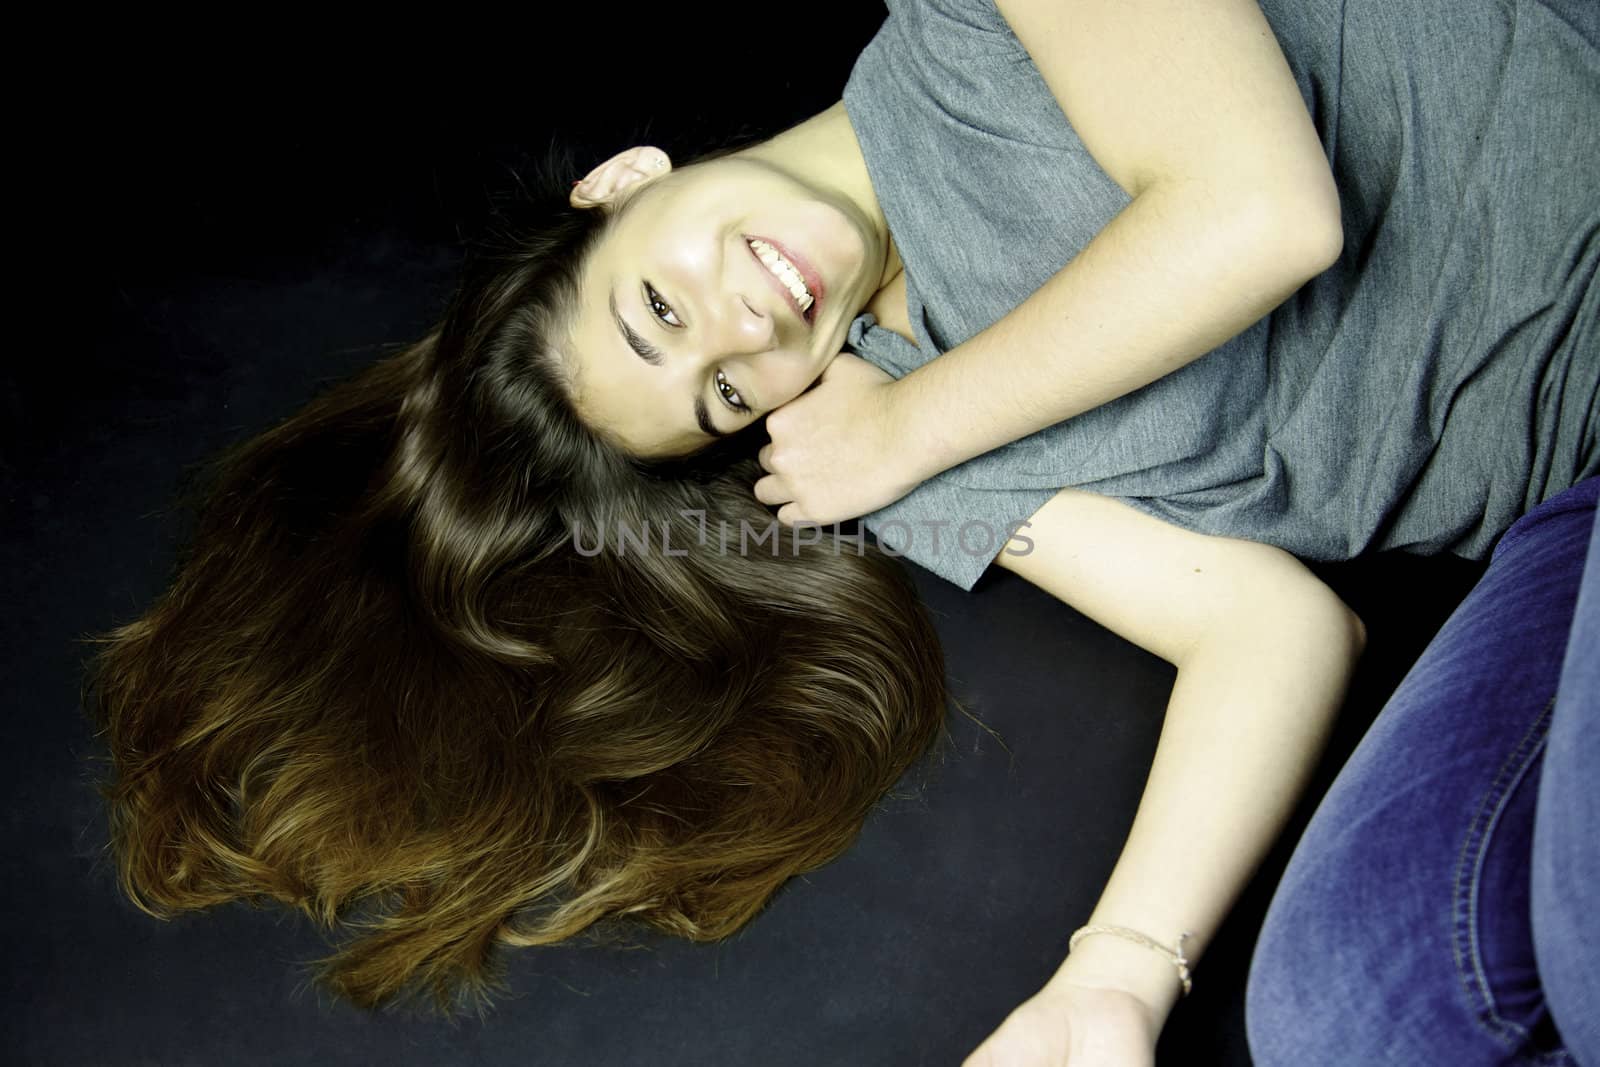 Girl with long hair on the ground smiling